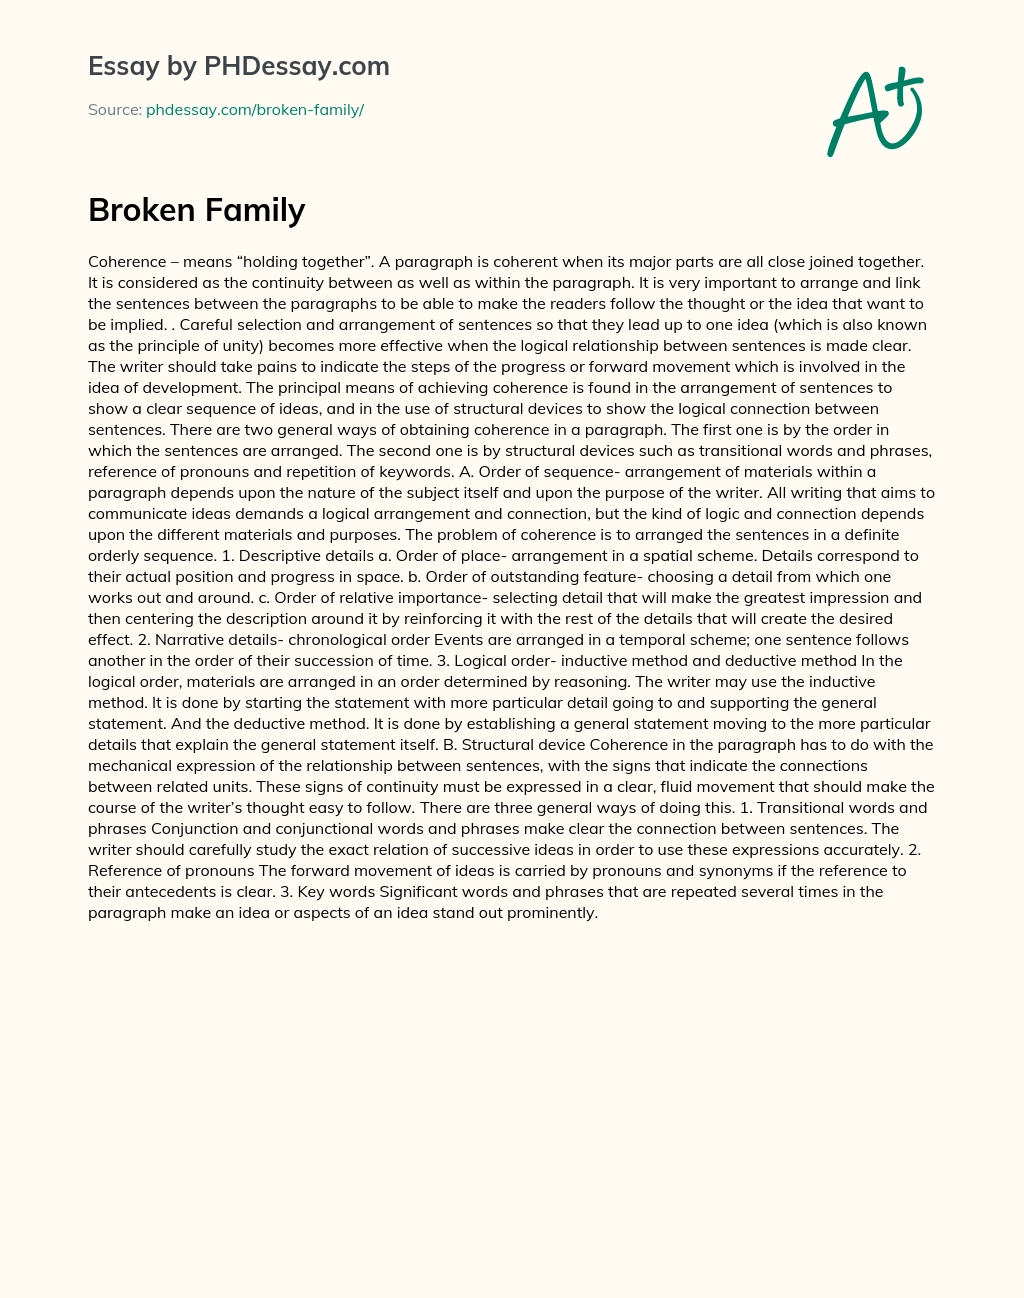 research paper about broken family